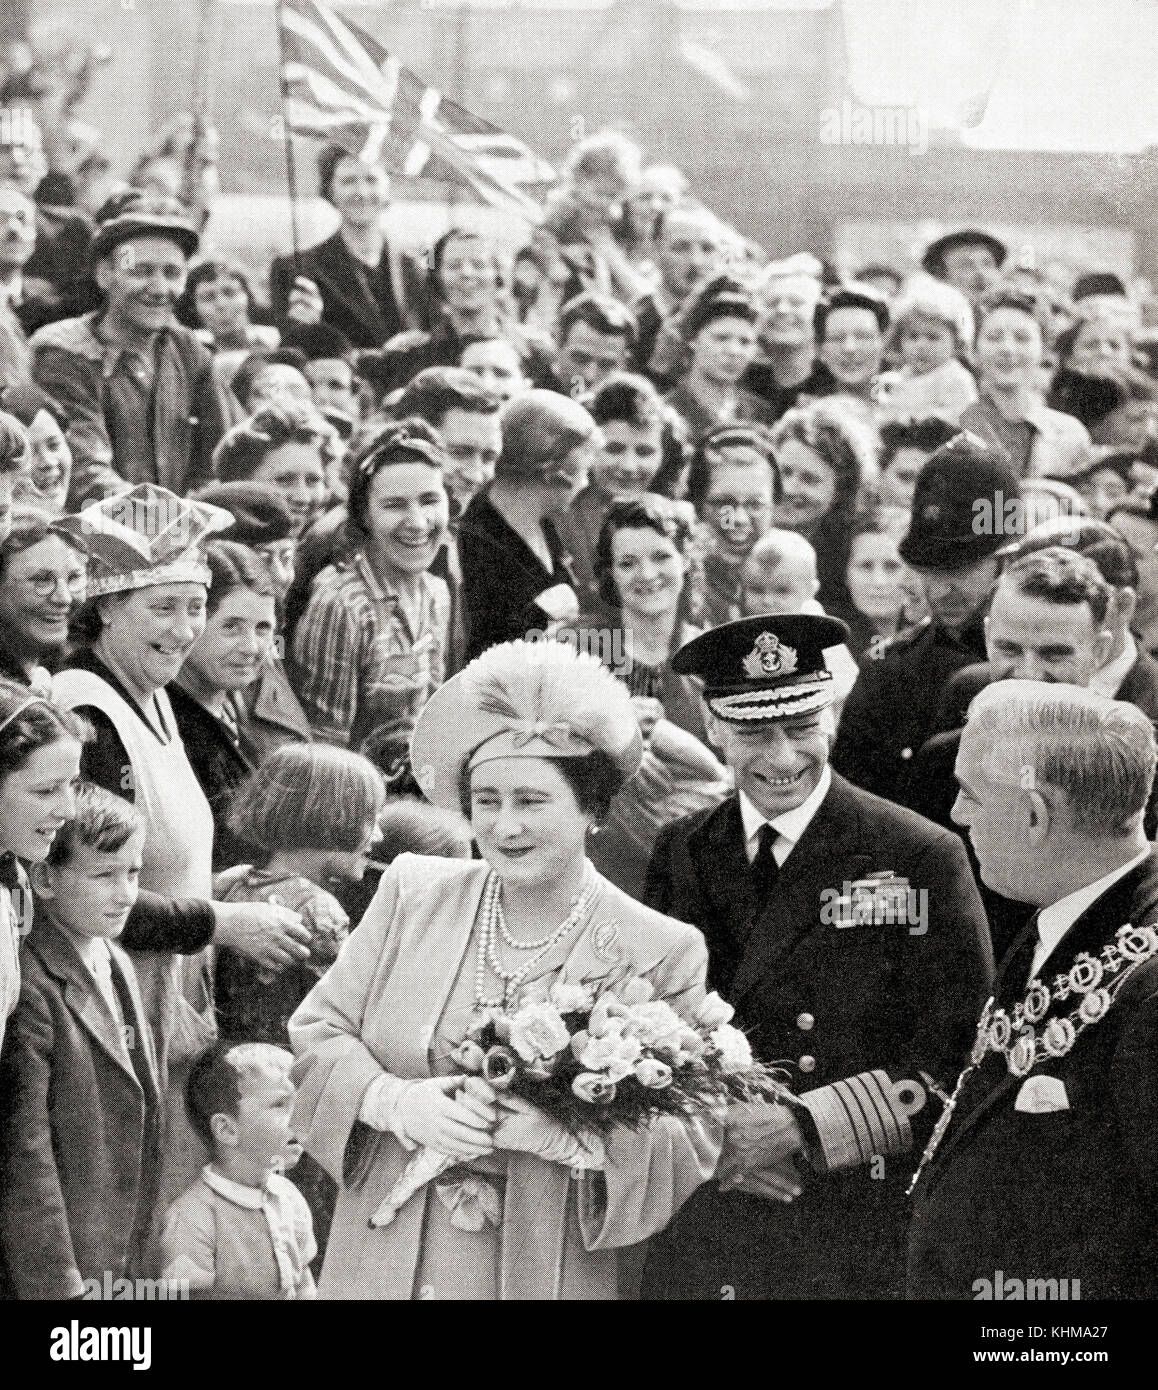 King George VI and Queen Elizabeth on their victory tour of London at the end of WWII in 1945.   George VI, 1895 – 1952.  King of the United Kingdom and the Dominions of the British Commonwealth.   Queen Elizabeth, The Queen Mother.  Elizabeth Angela Marguerite Bowes-Lyon, 1900 – 2002.  Wife of King George VI and mother of Queen Elizabeth II. Stock Photo